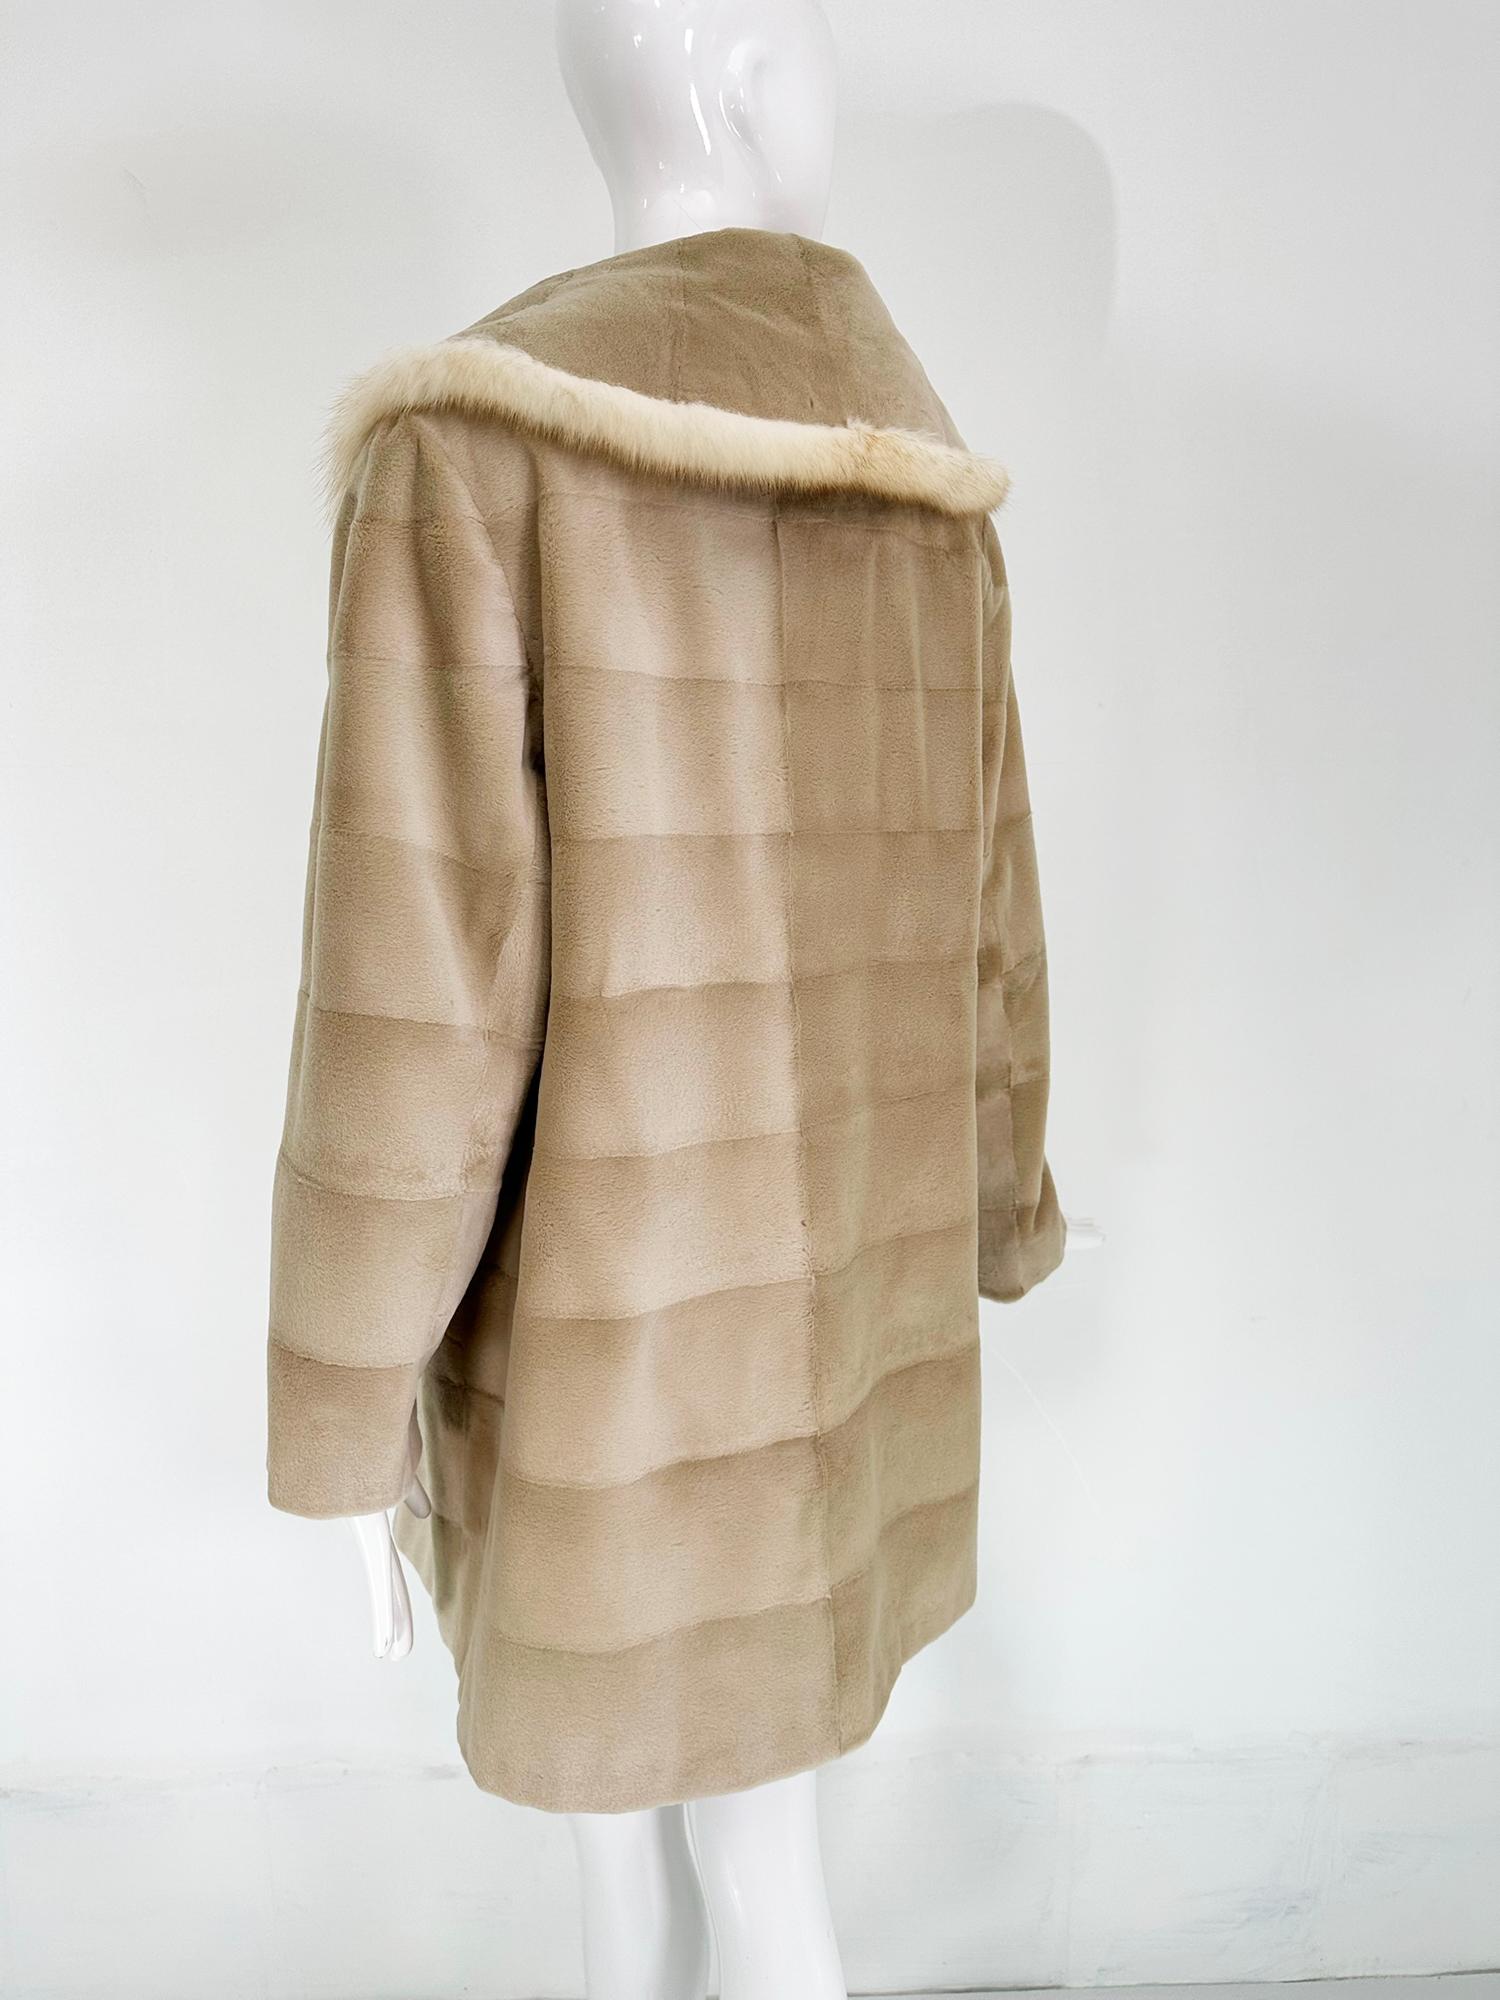 Champagne Blond Sheared Mink Reversible Jacket With Full Shawl Collar  For Sale 3